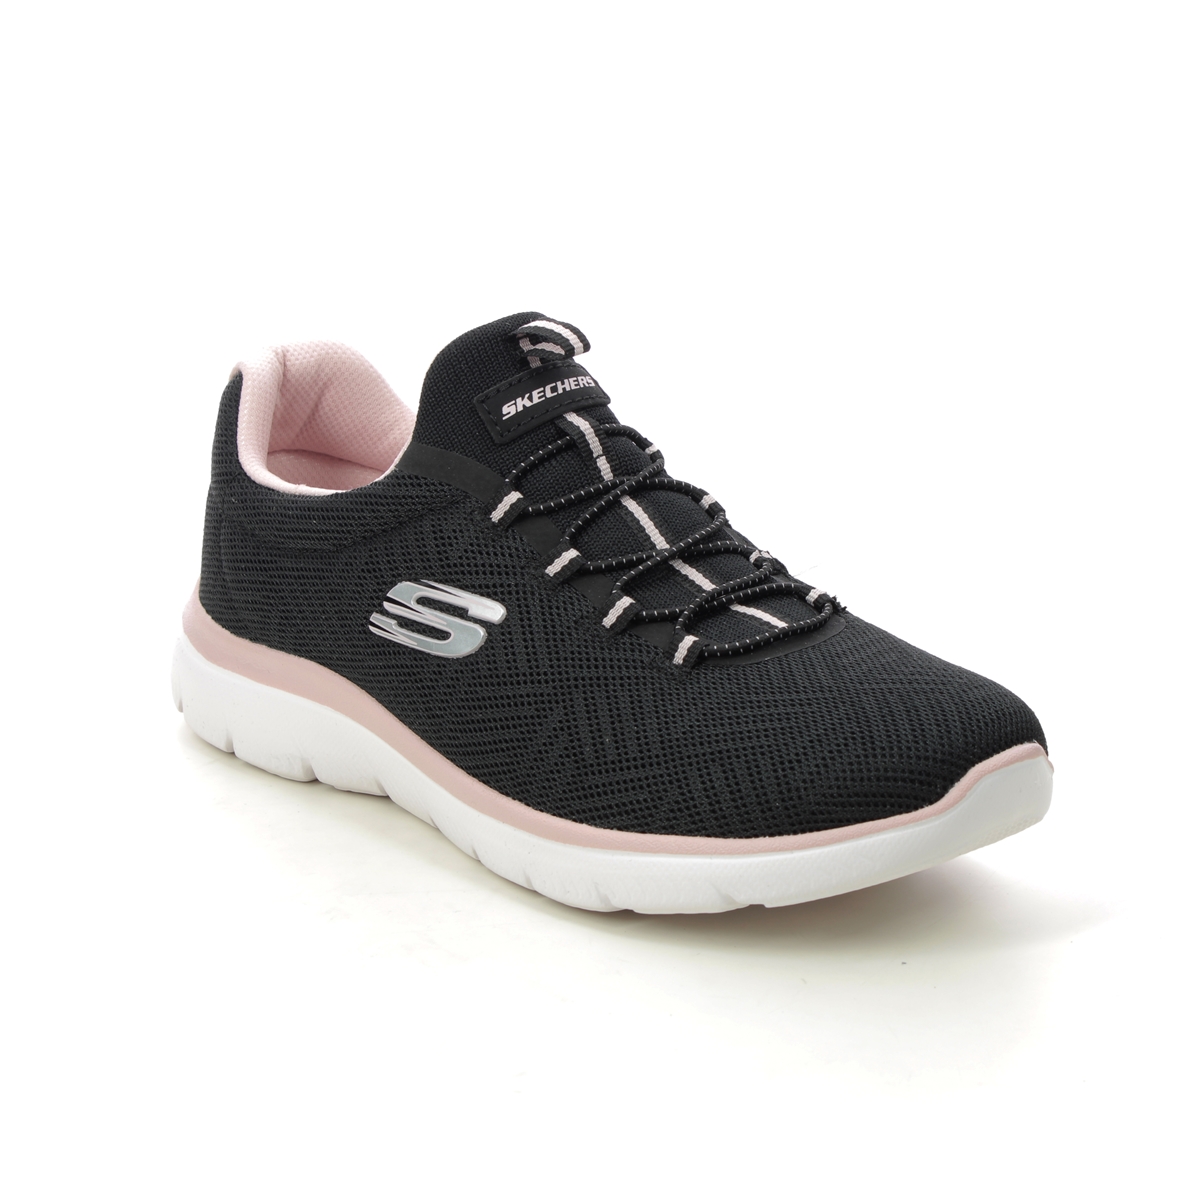 Skechers Summits Bungee BKPK Black pink Womens trainers 150119 in a Plain Textile in Size 5